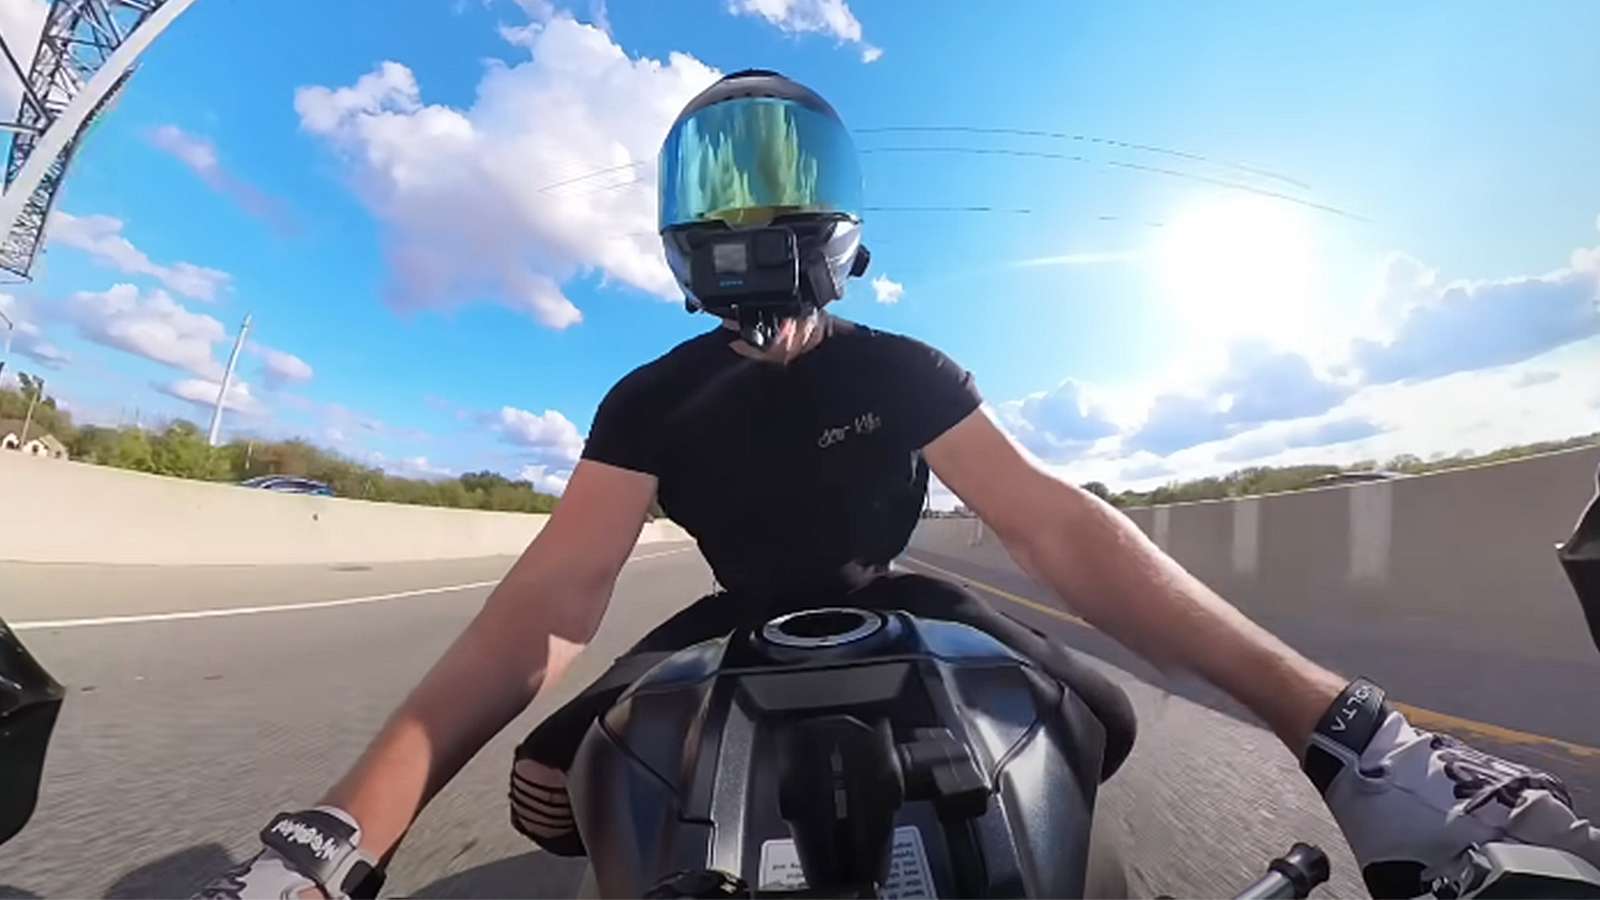 youtuber-arrested-200-mph-challenge-motorcycle-gixxer-brah